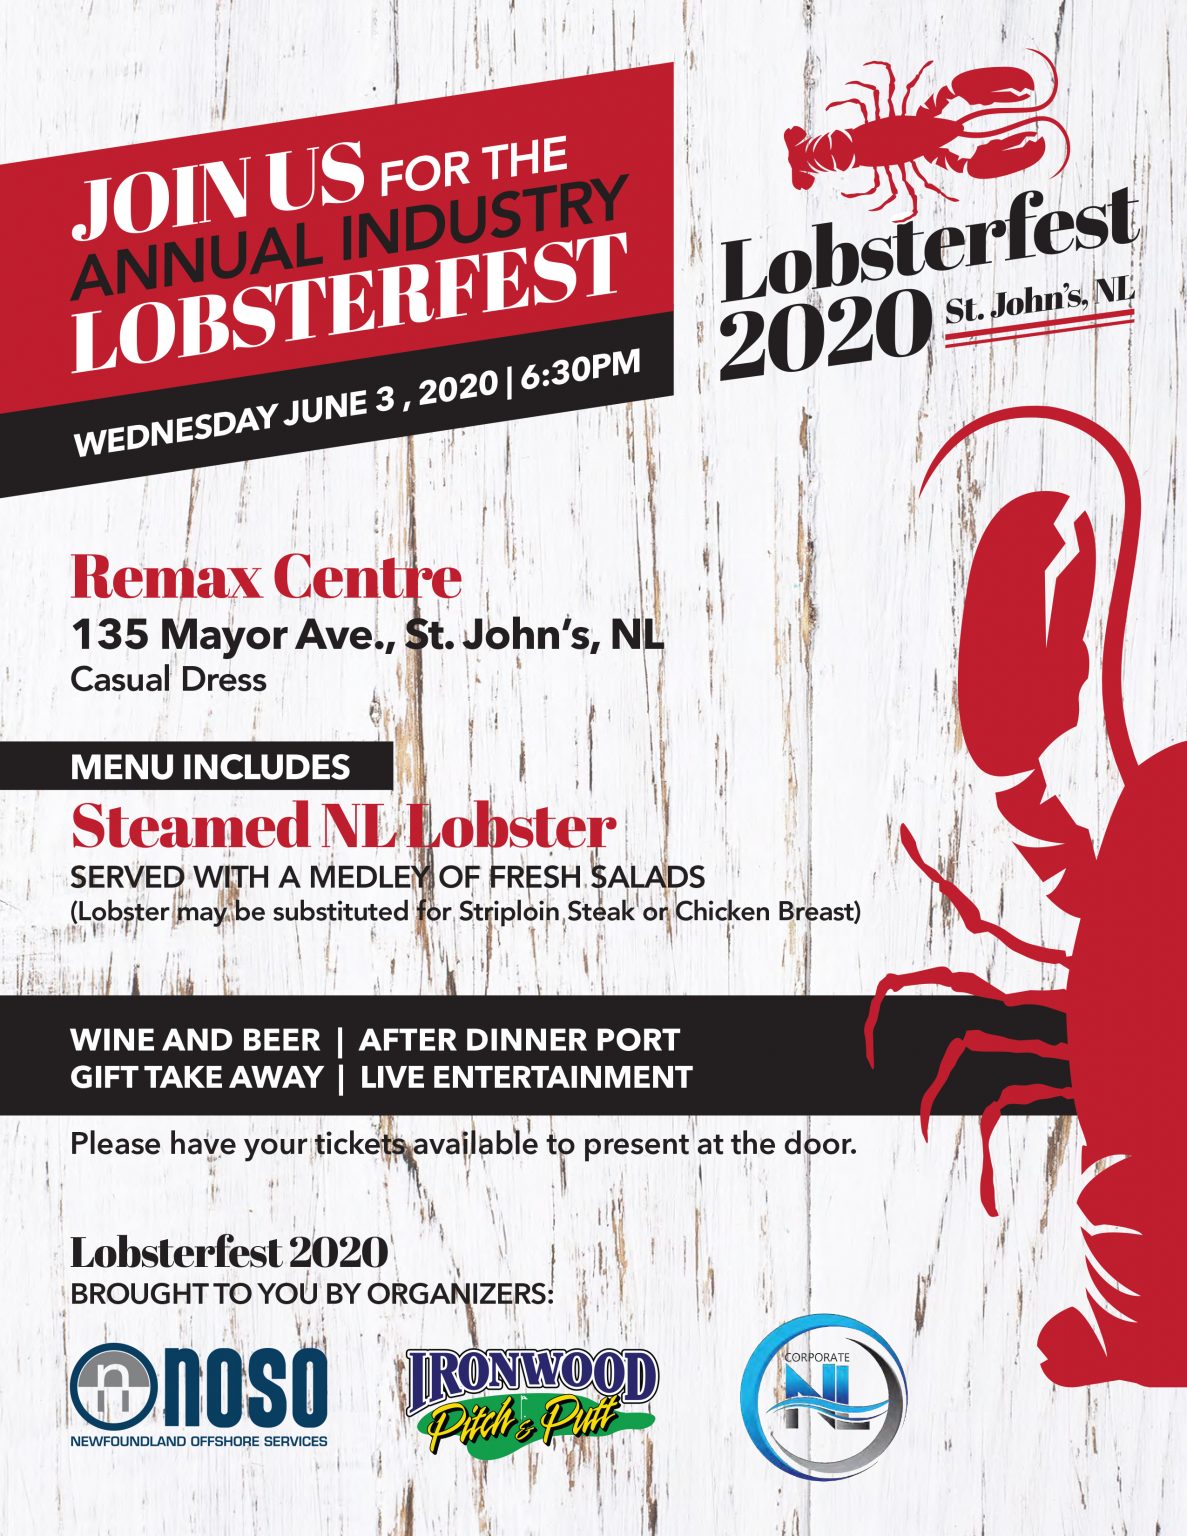 Lobsterfest tickets now available for purchase! Energy NL